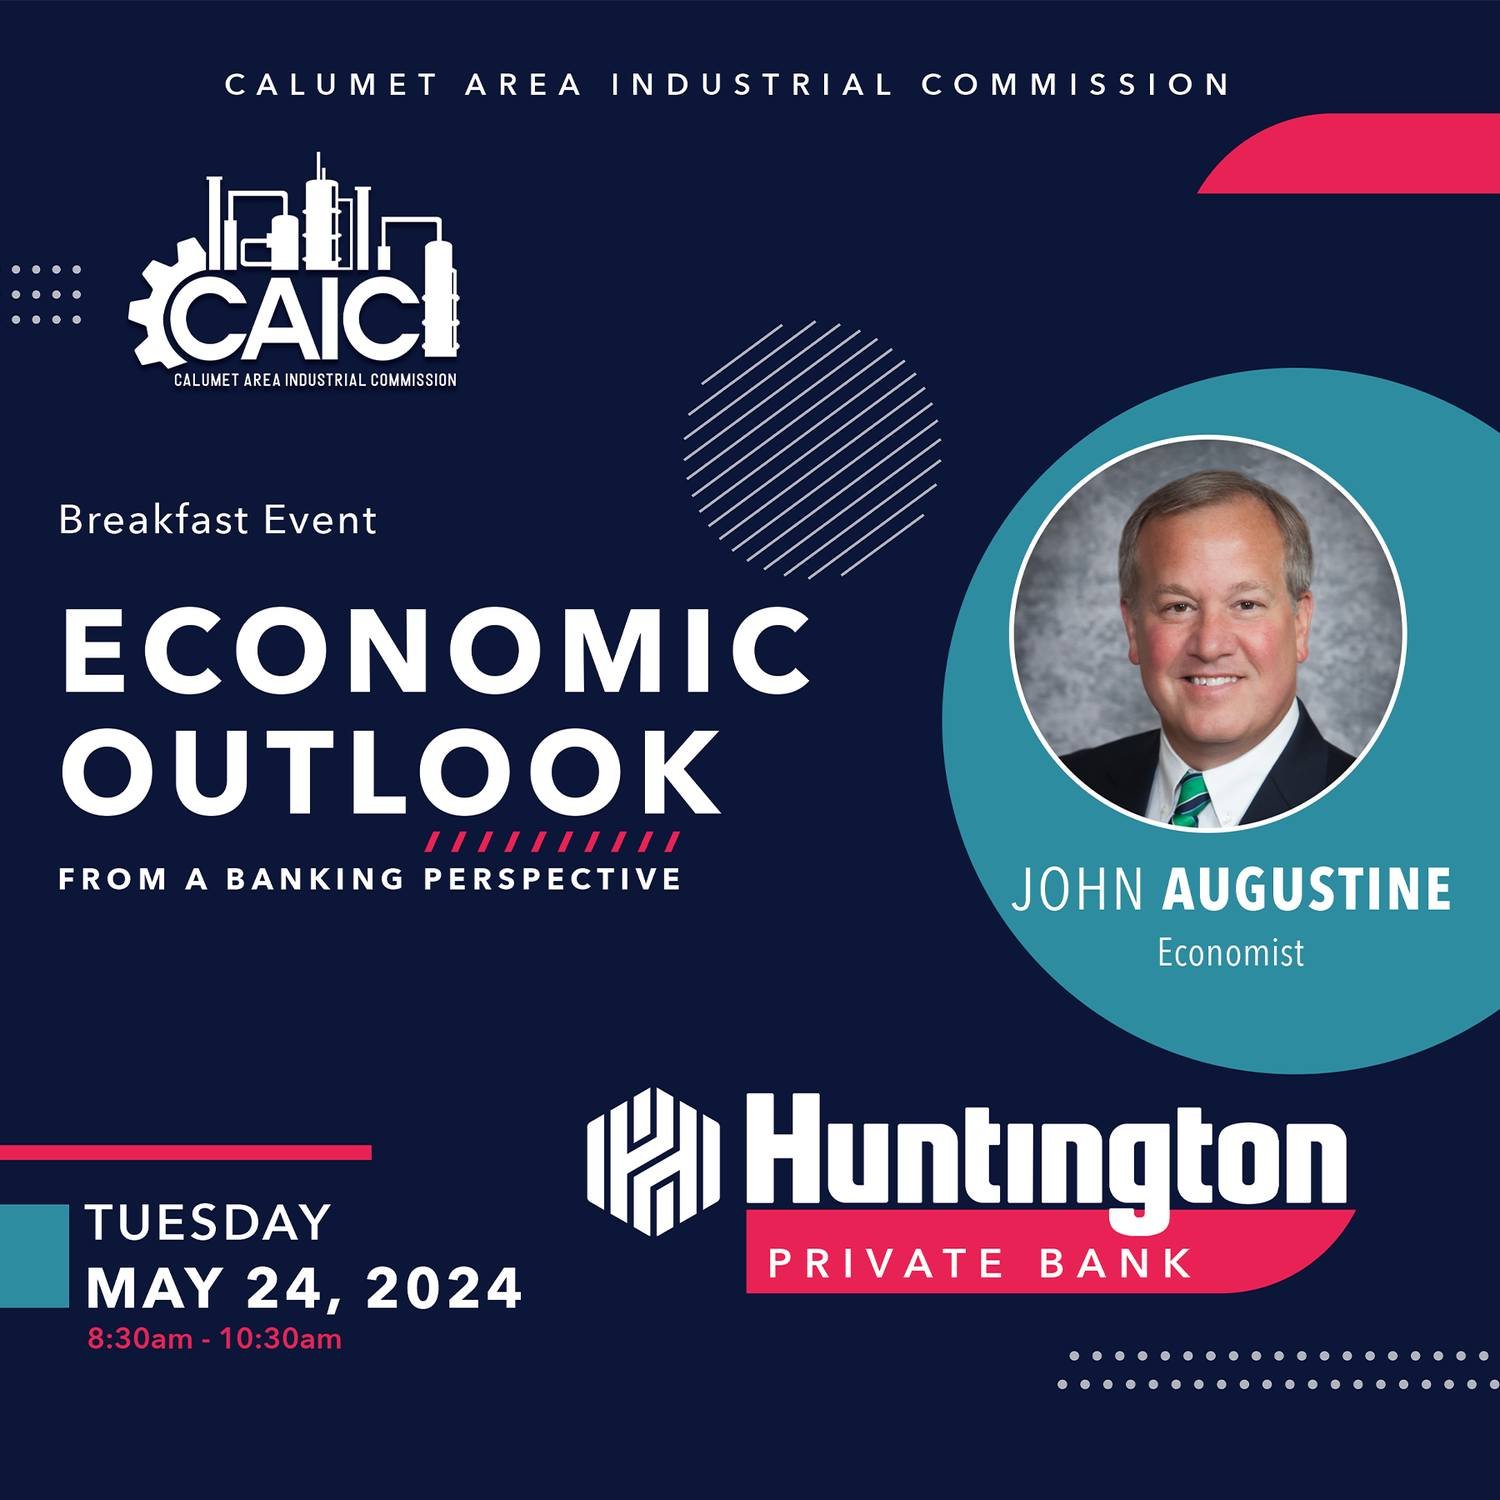 The Calumet Area Industrial Commission has a Breakfast Event on Friday, May 24, 2024, at the Ridge Country Club, 10522 South California Ave. Chicago, IL. 60628 from 8:30 A.M. - 10:30 A.M.

John Augustine is the Chief Investment Officer at Huntington 